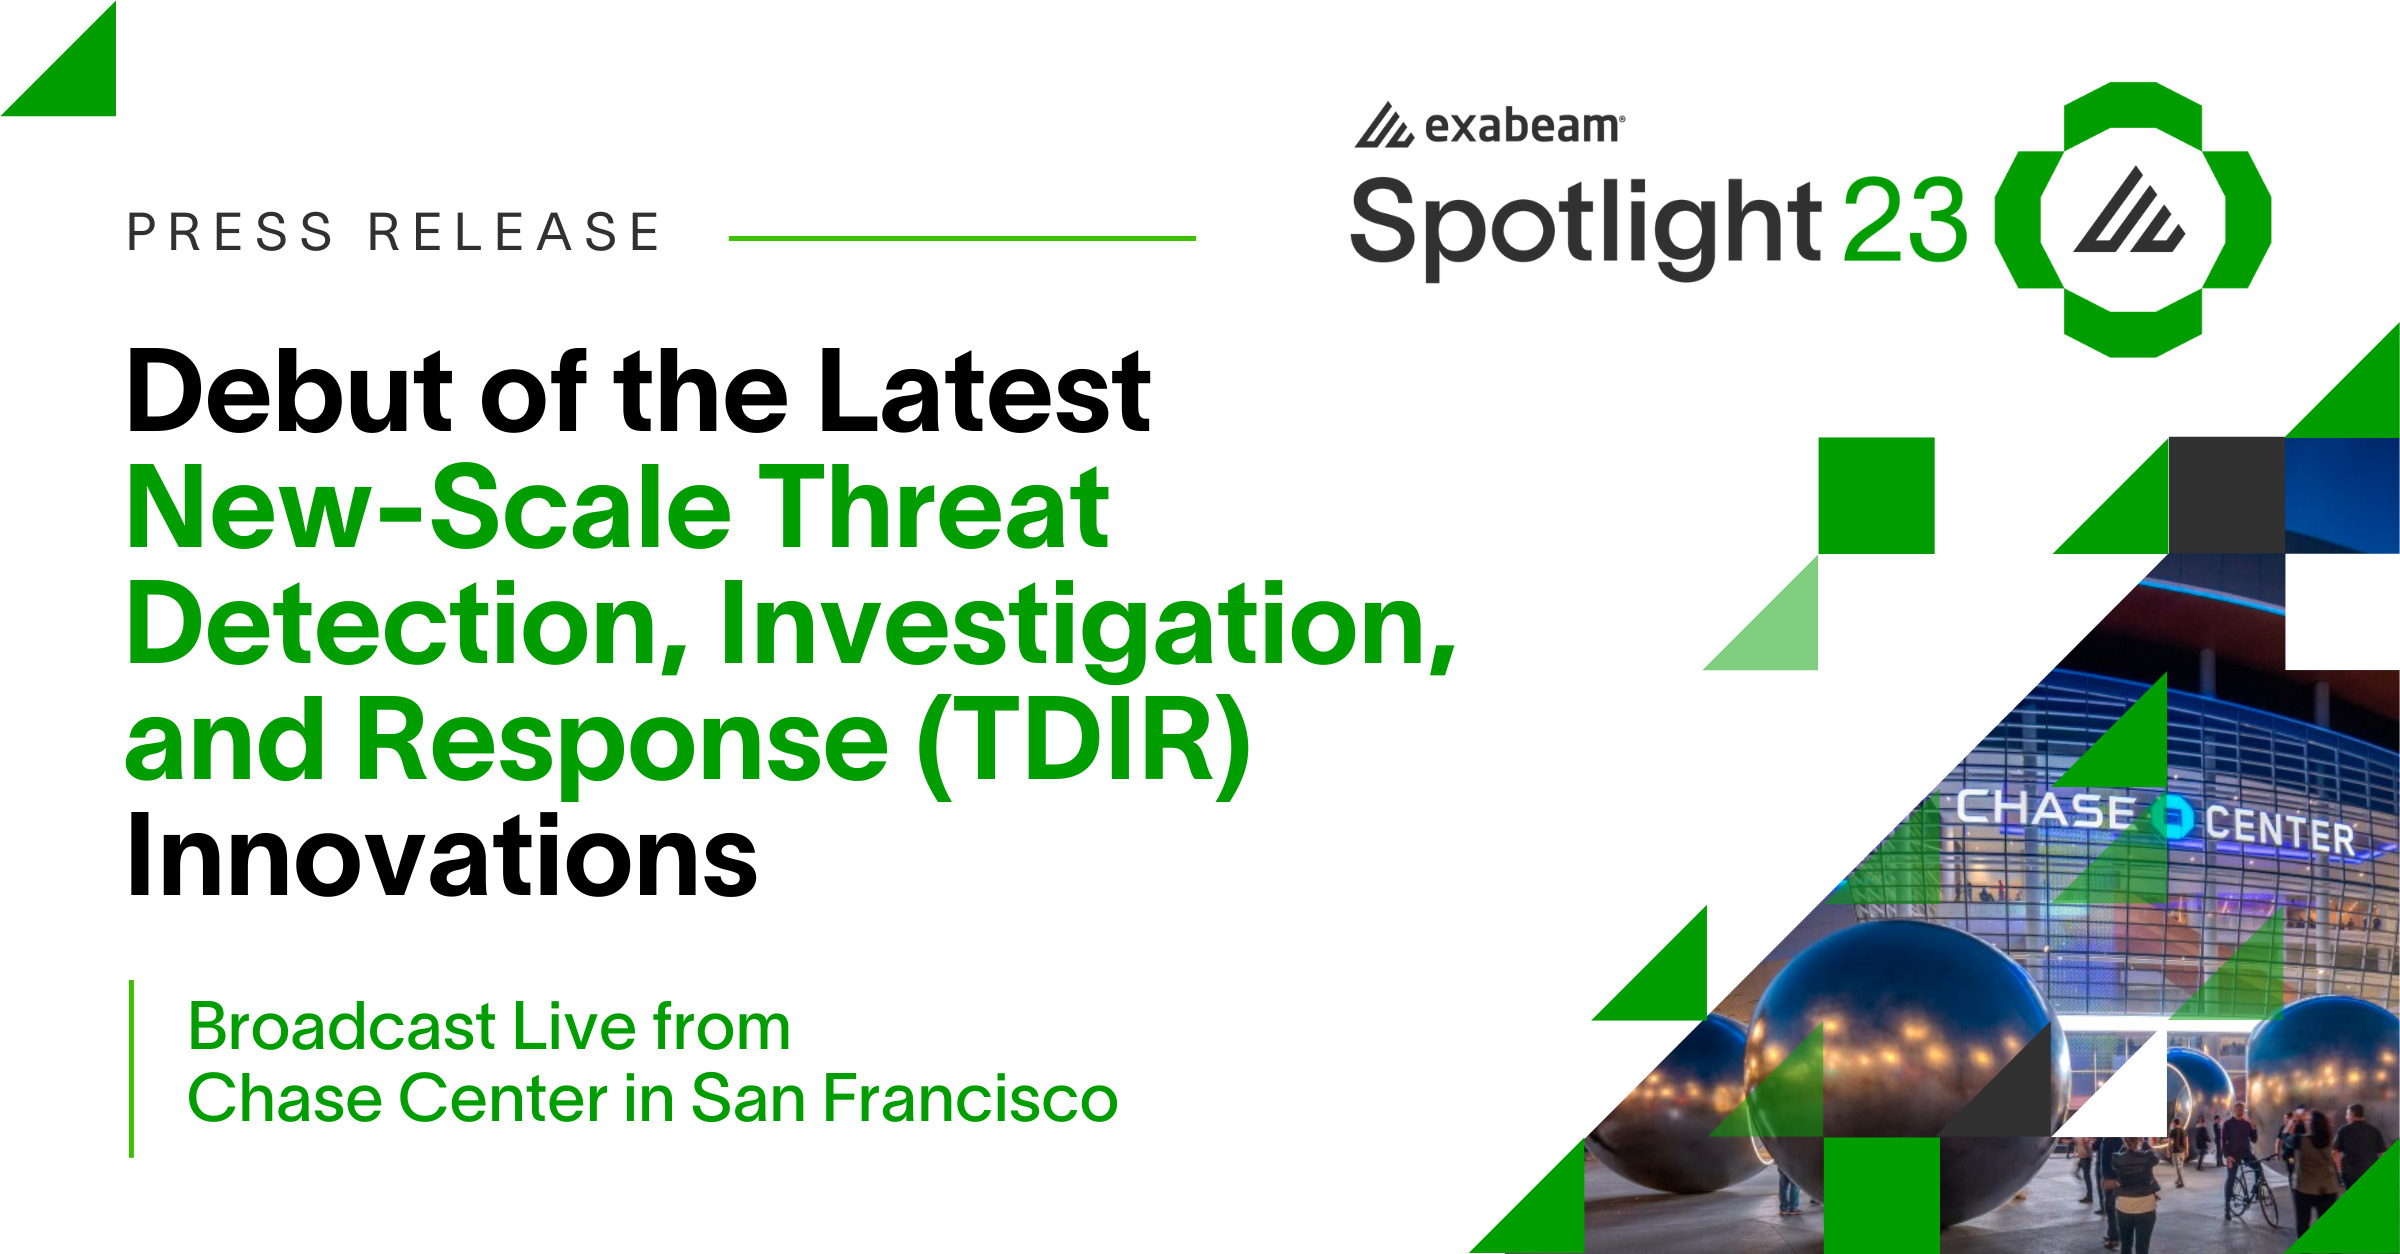 Exabeam Spotlight23 to Debut Latest New-Scale Threat Detection, Investigation, and Response (TDIR) Innovations Live from Chase Center in San Francisco